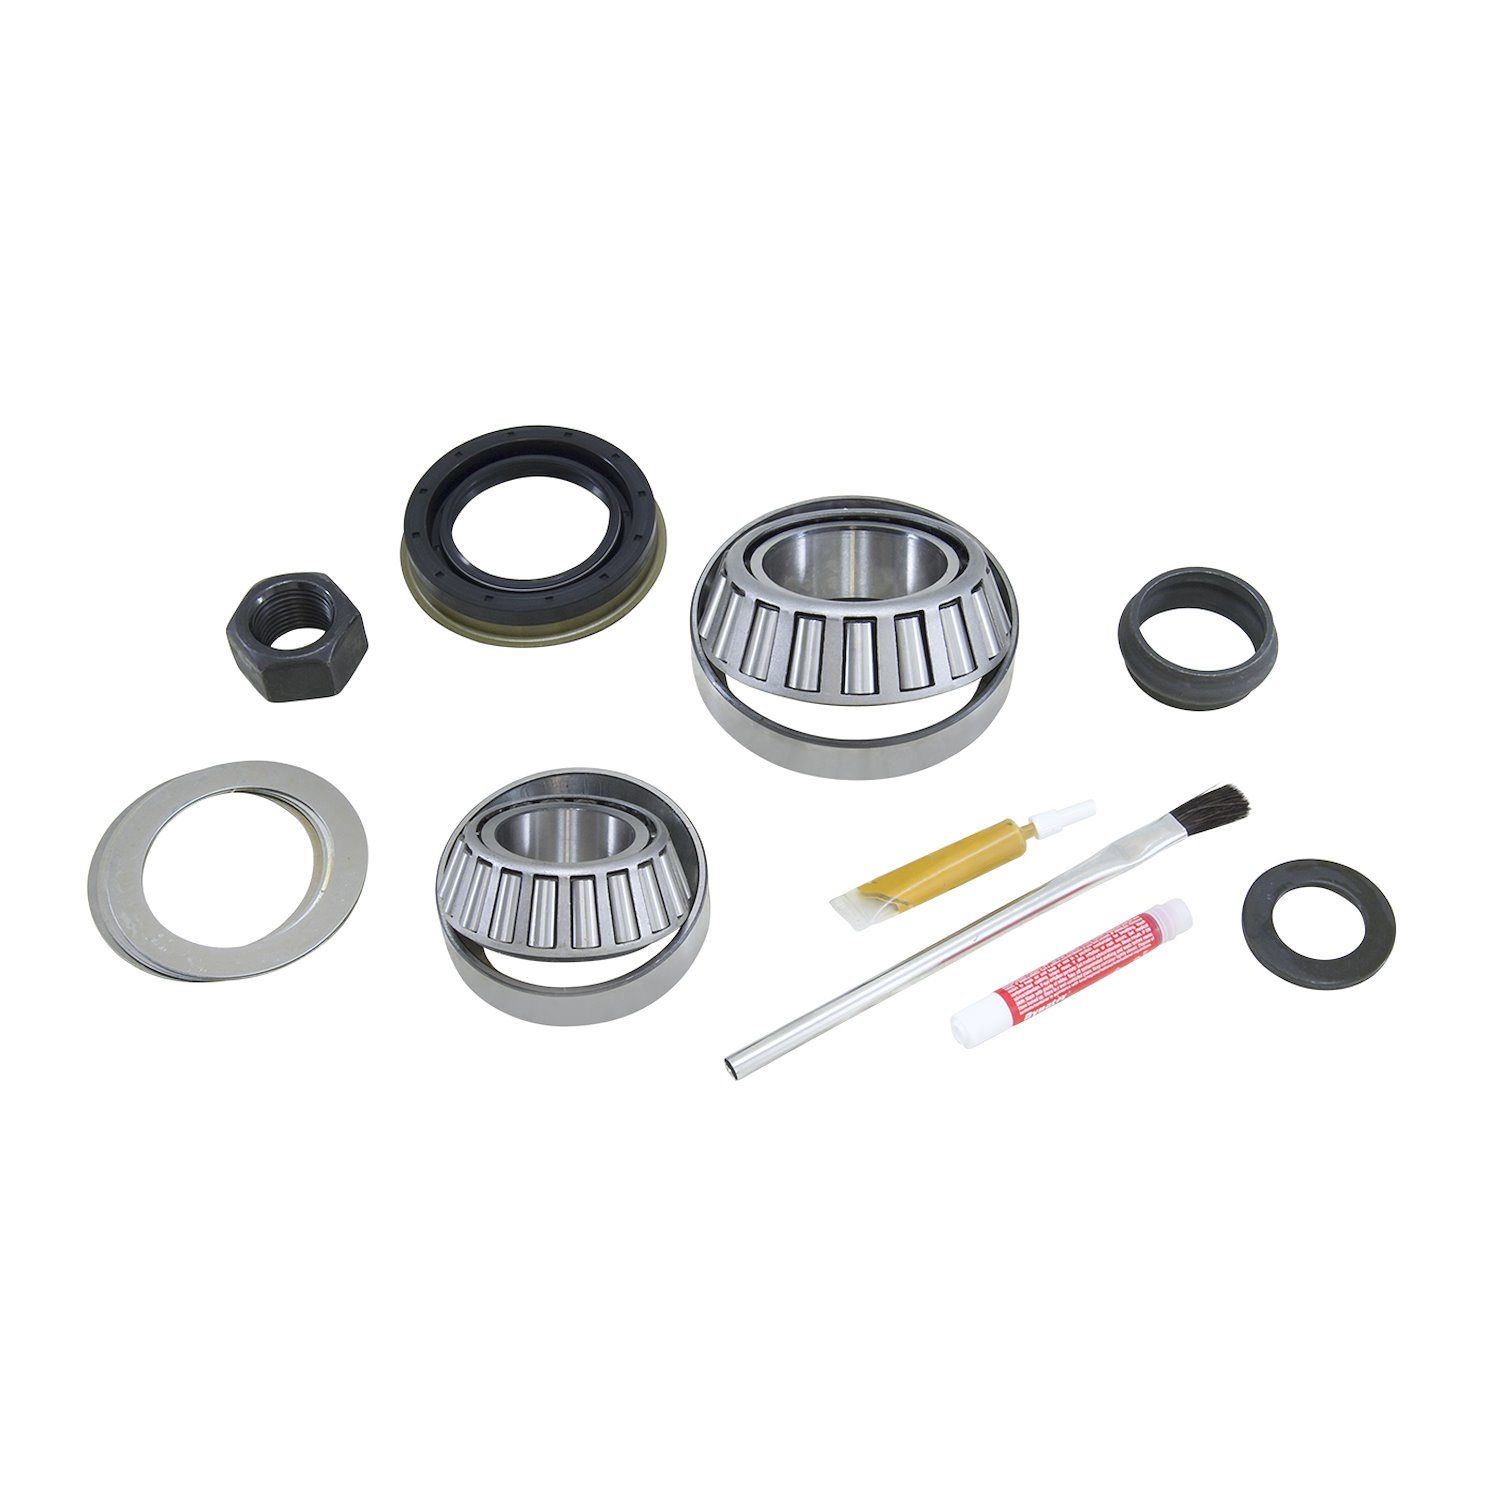 Pinion Install Kit For Dana 44 Jk Rubicon Front Differential